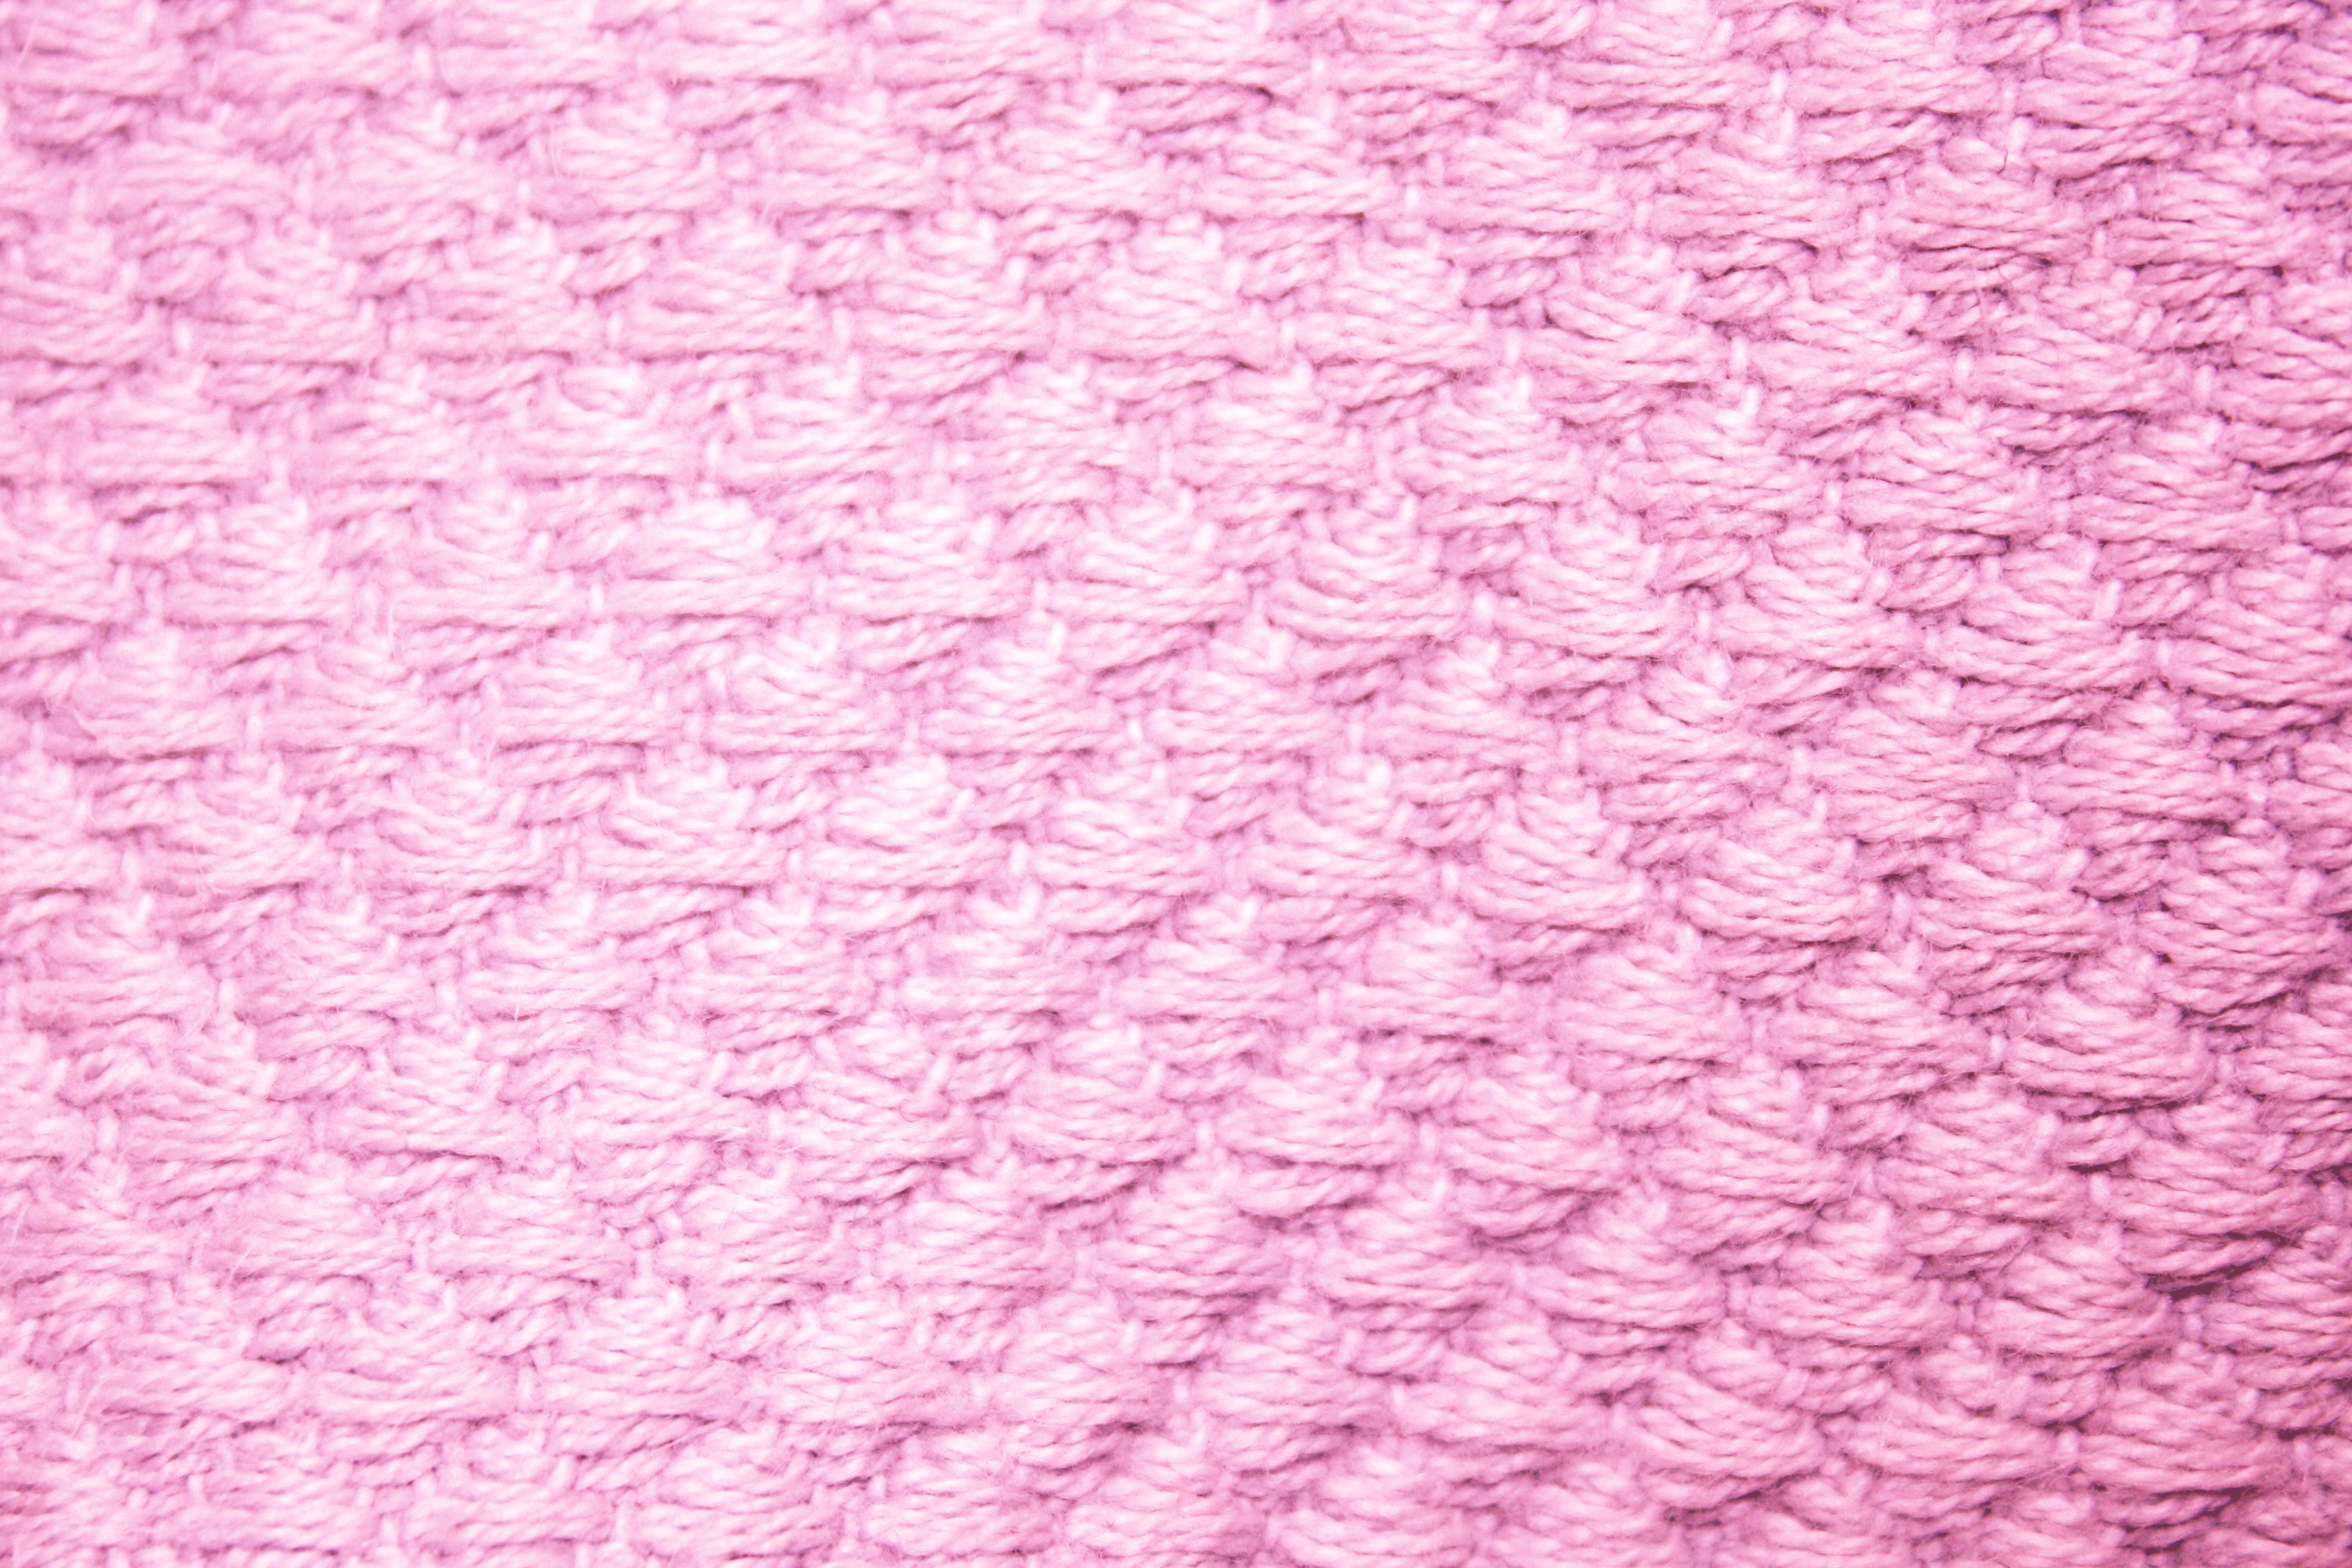 Pink Diamond Patterned Blanket Close Up Texture Picture. Free Photograph. Photo Public Domain